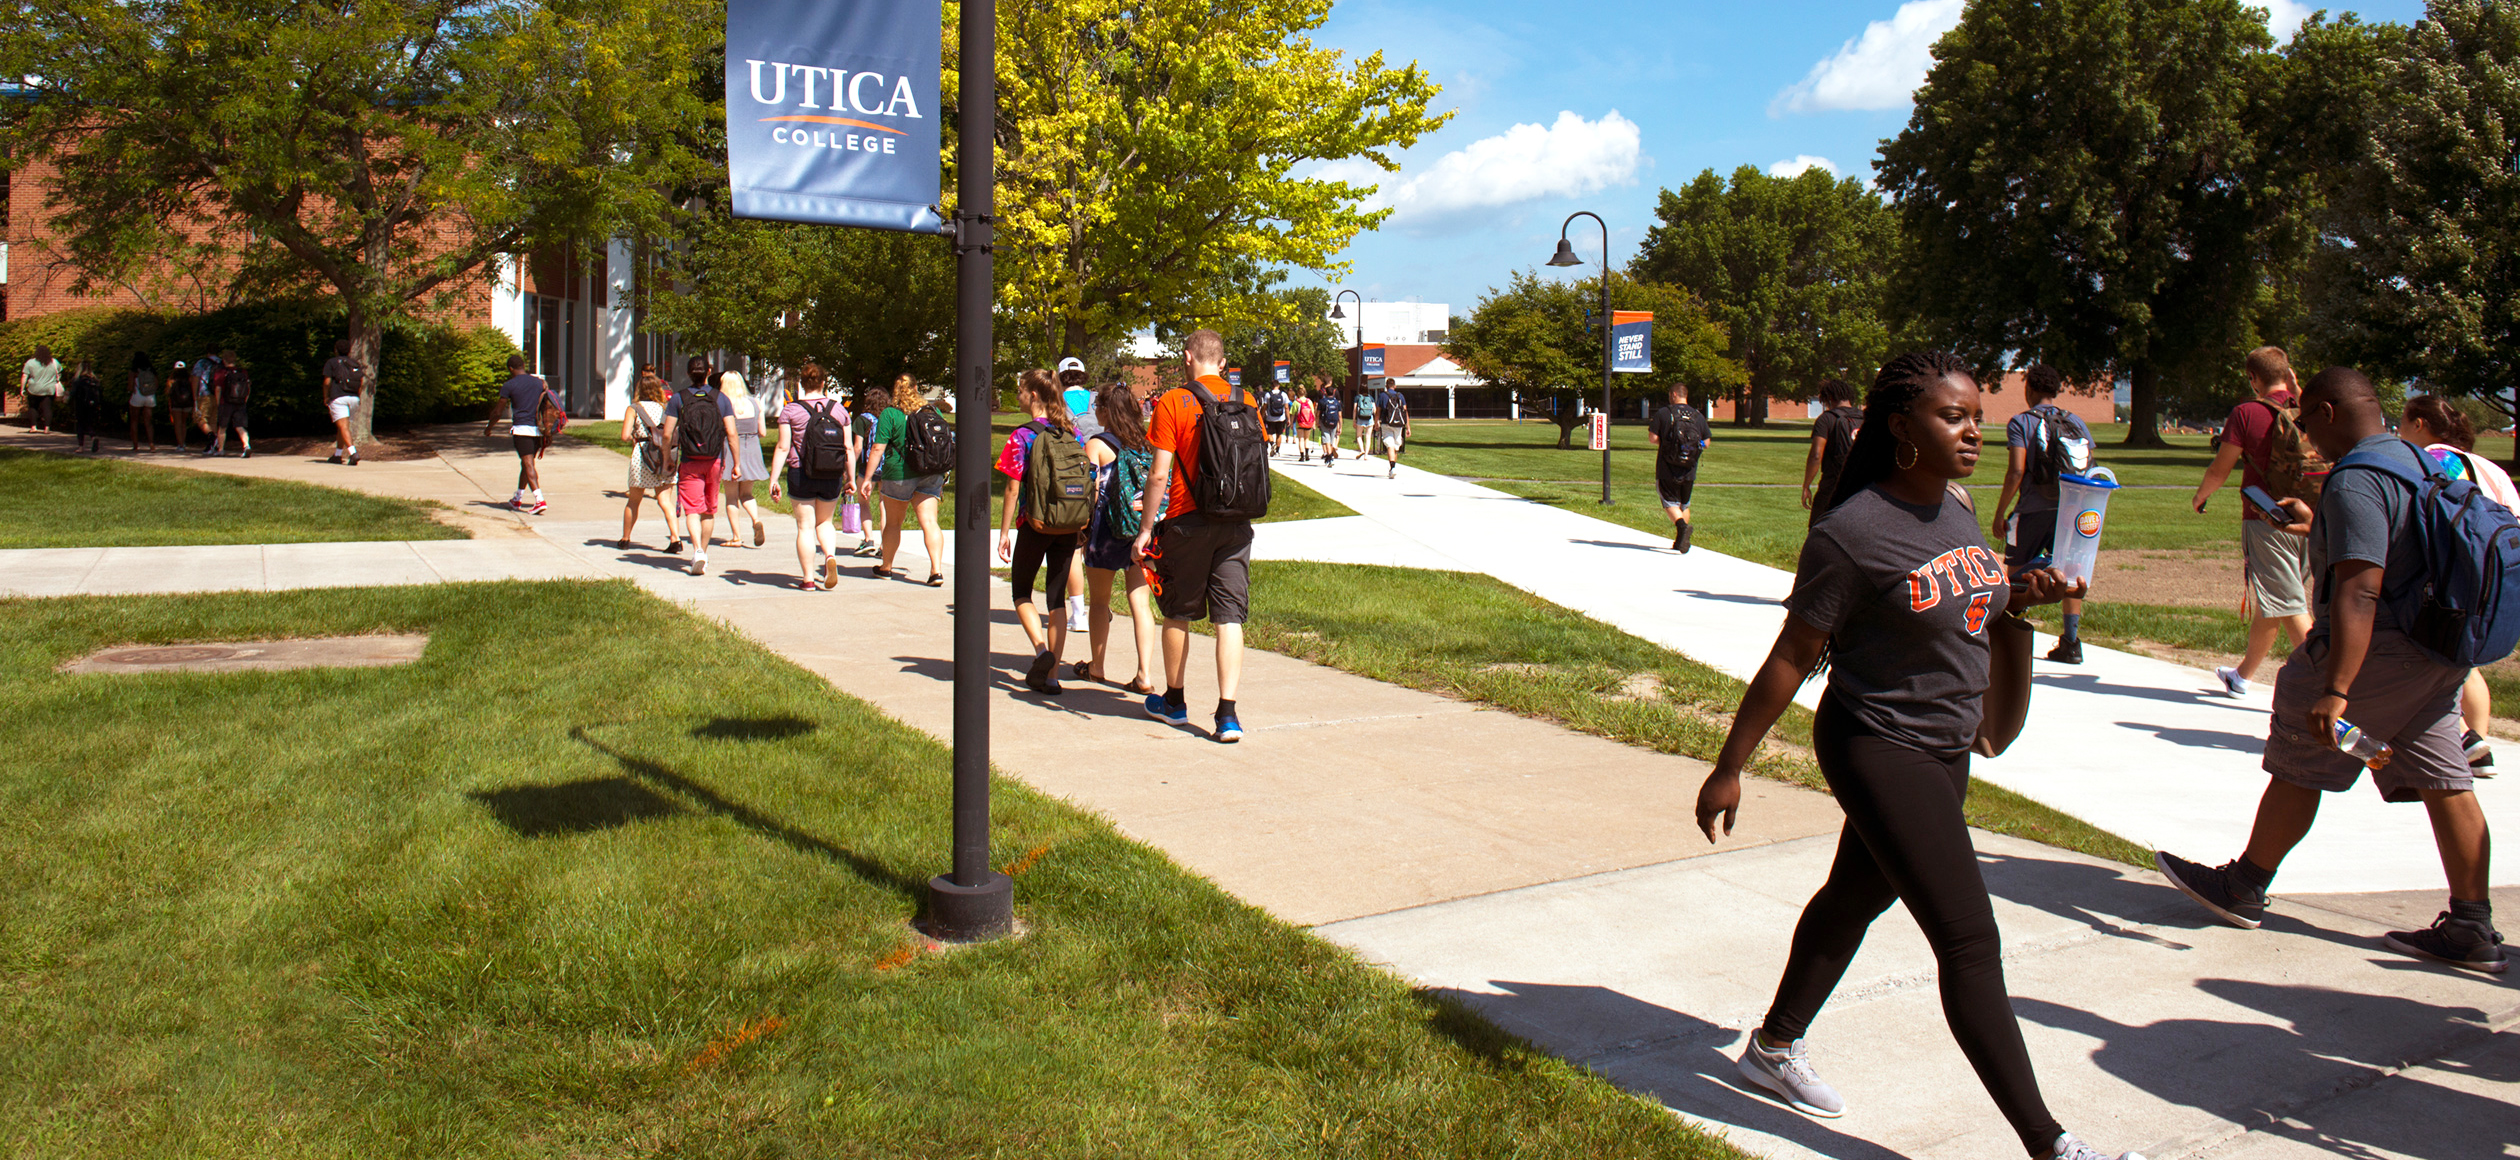 The Applied Ethics Institute at Utica University - Lisa Guenther